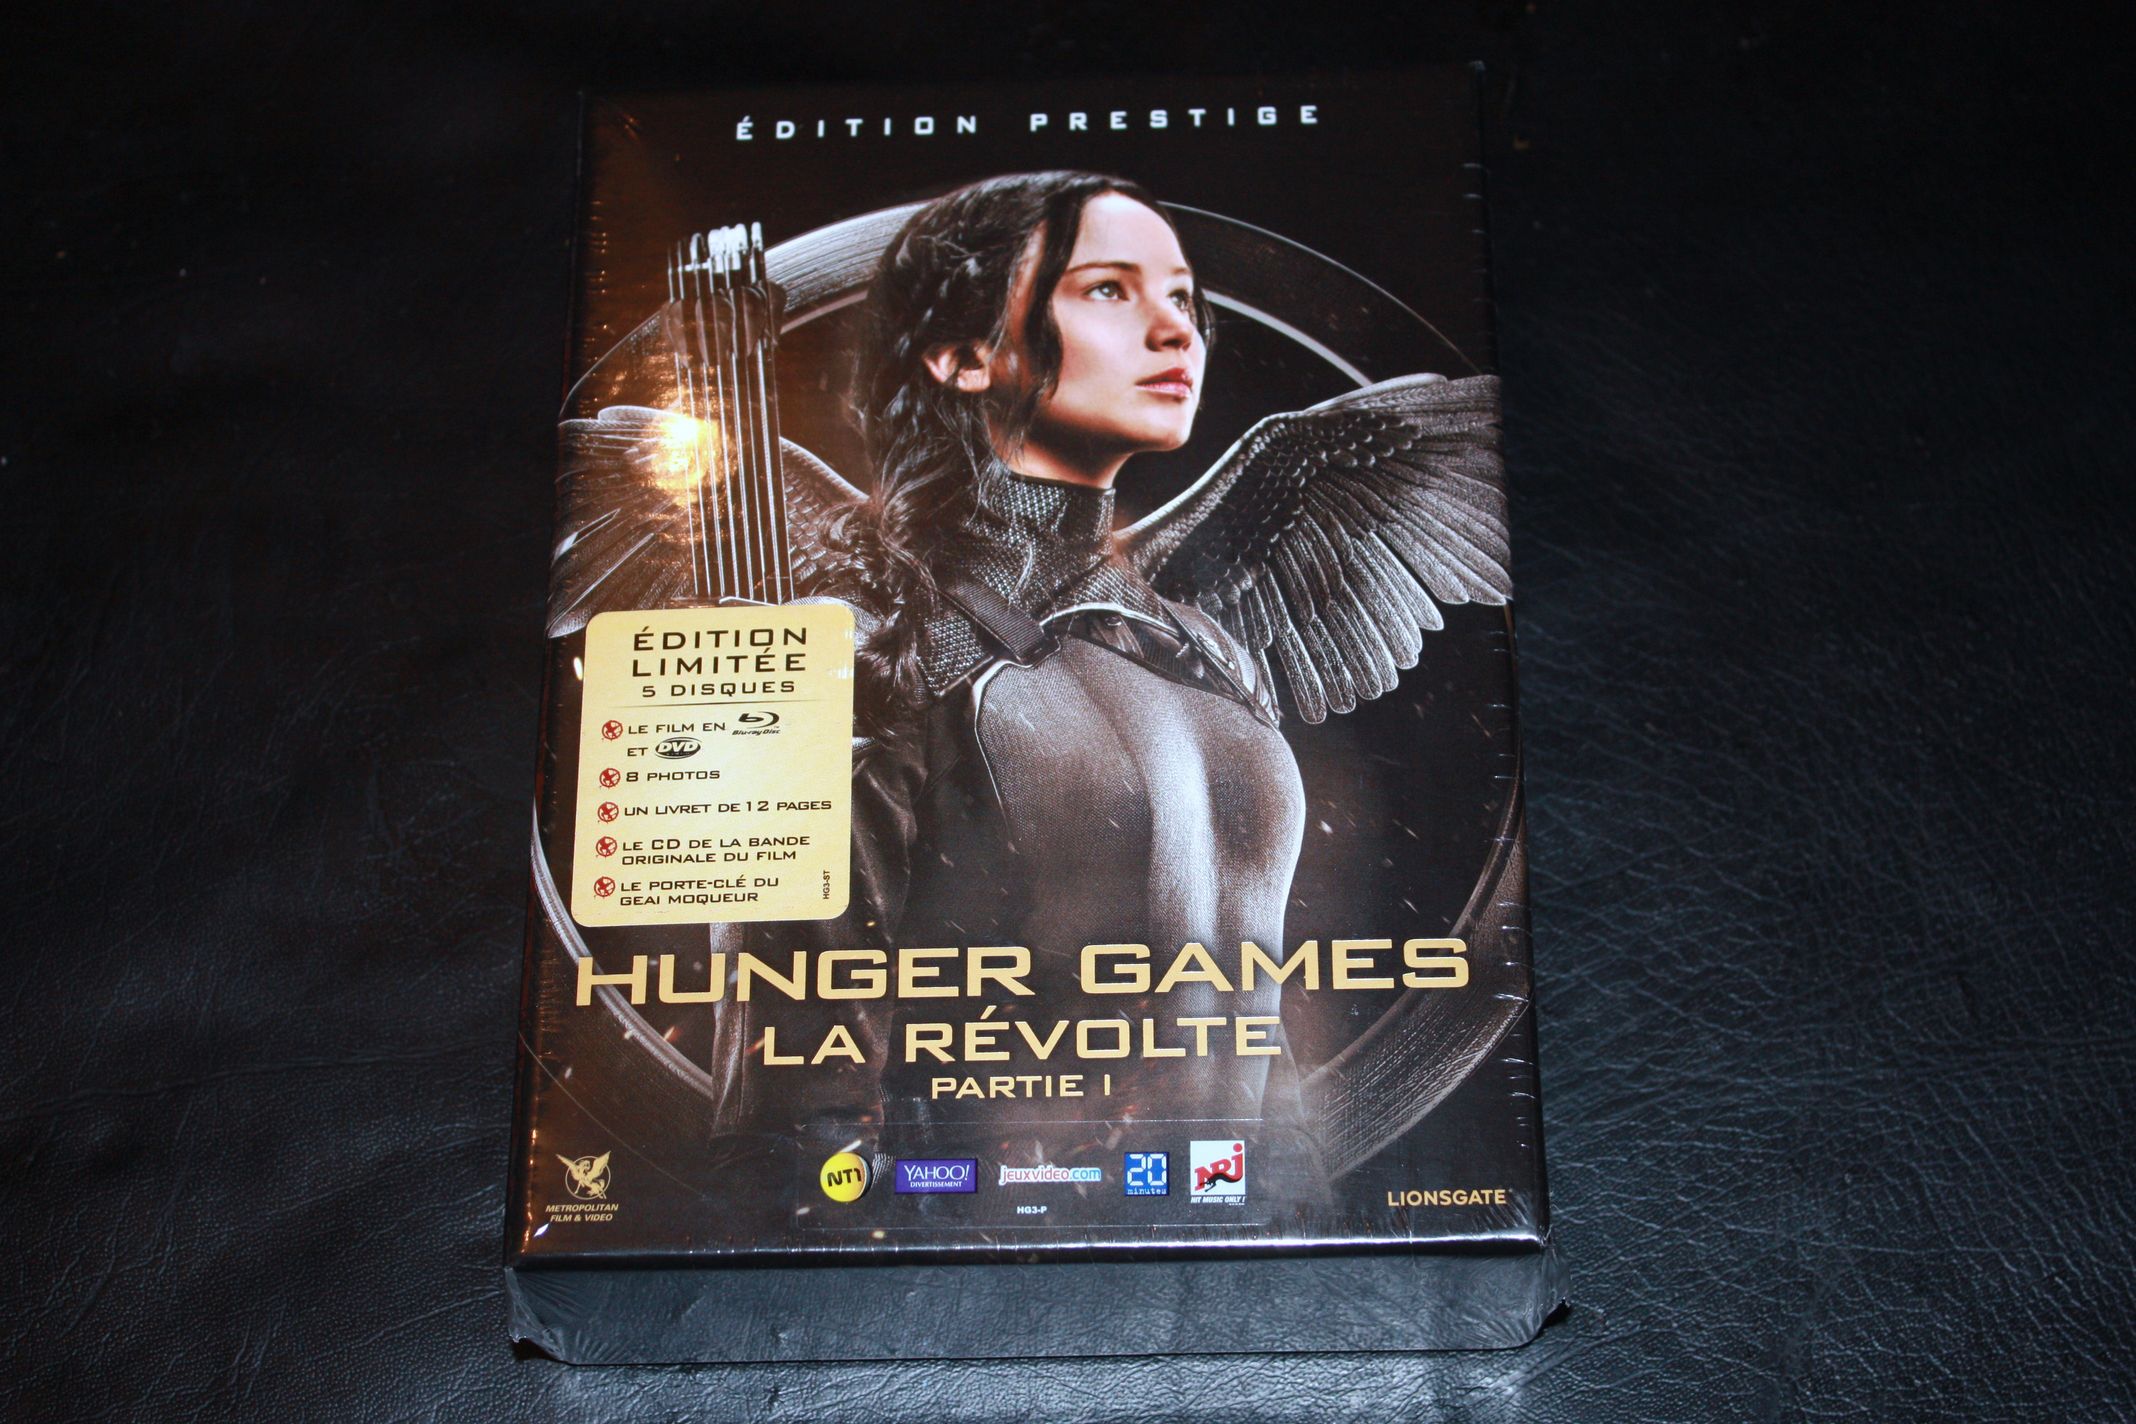 HUNGER GAMES INTEGRALE EDITION COLLECTOR PRESTIGE BLU RAY + DVD